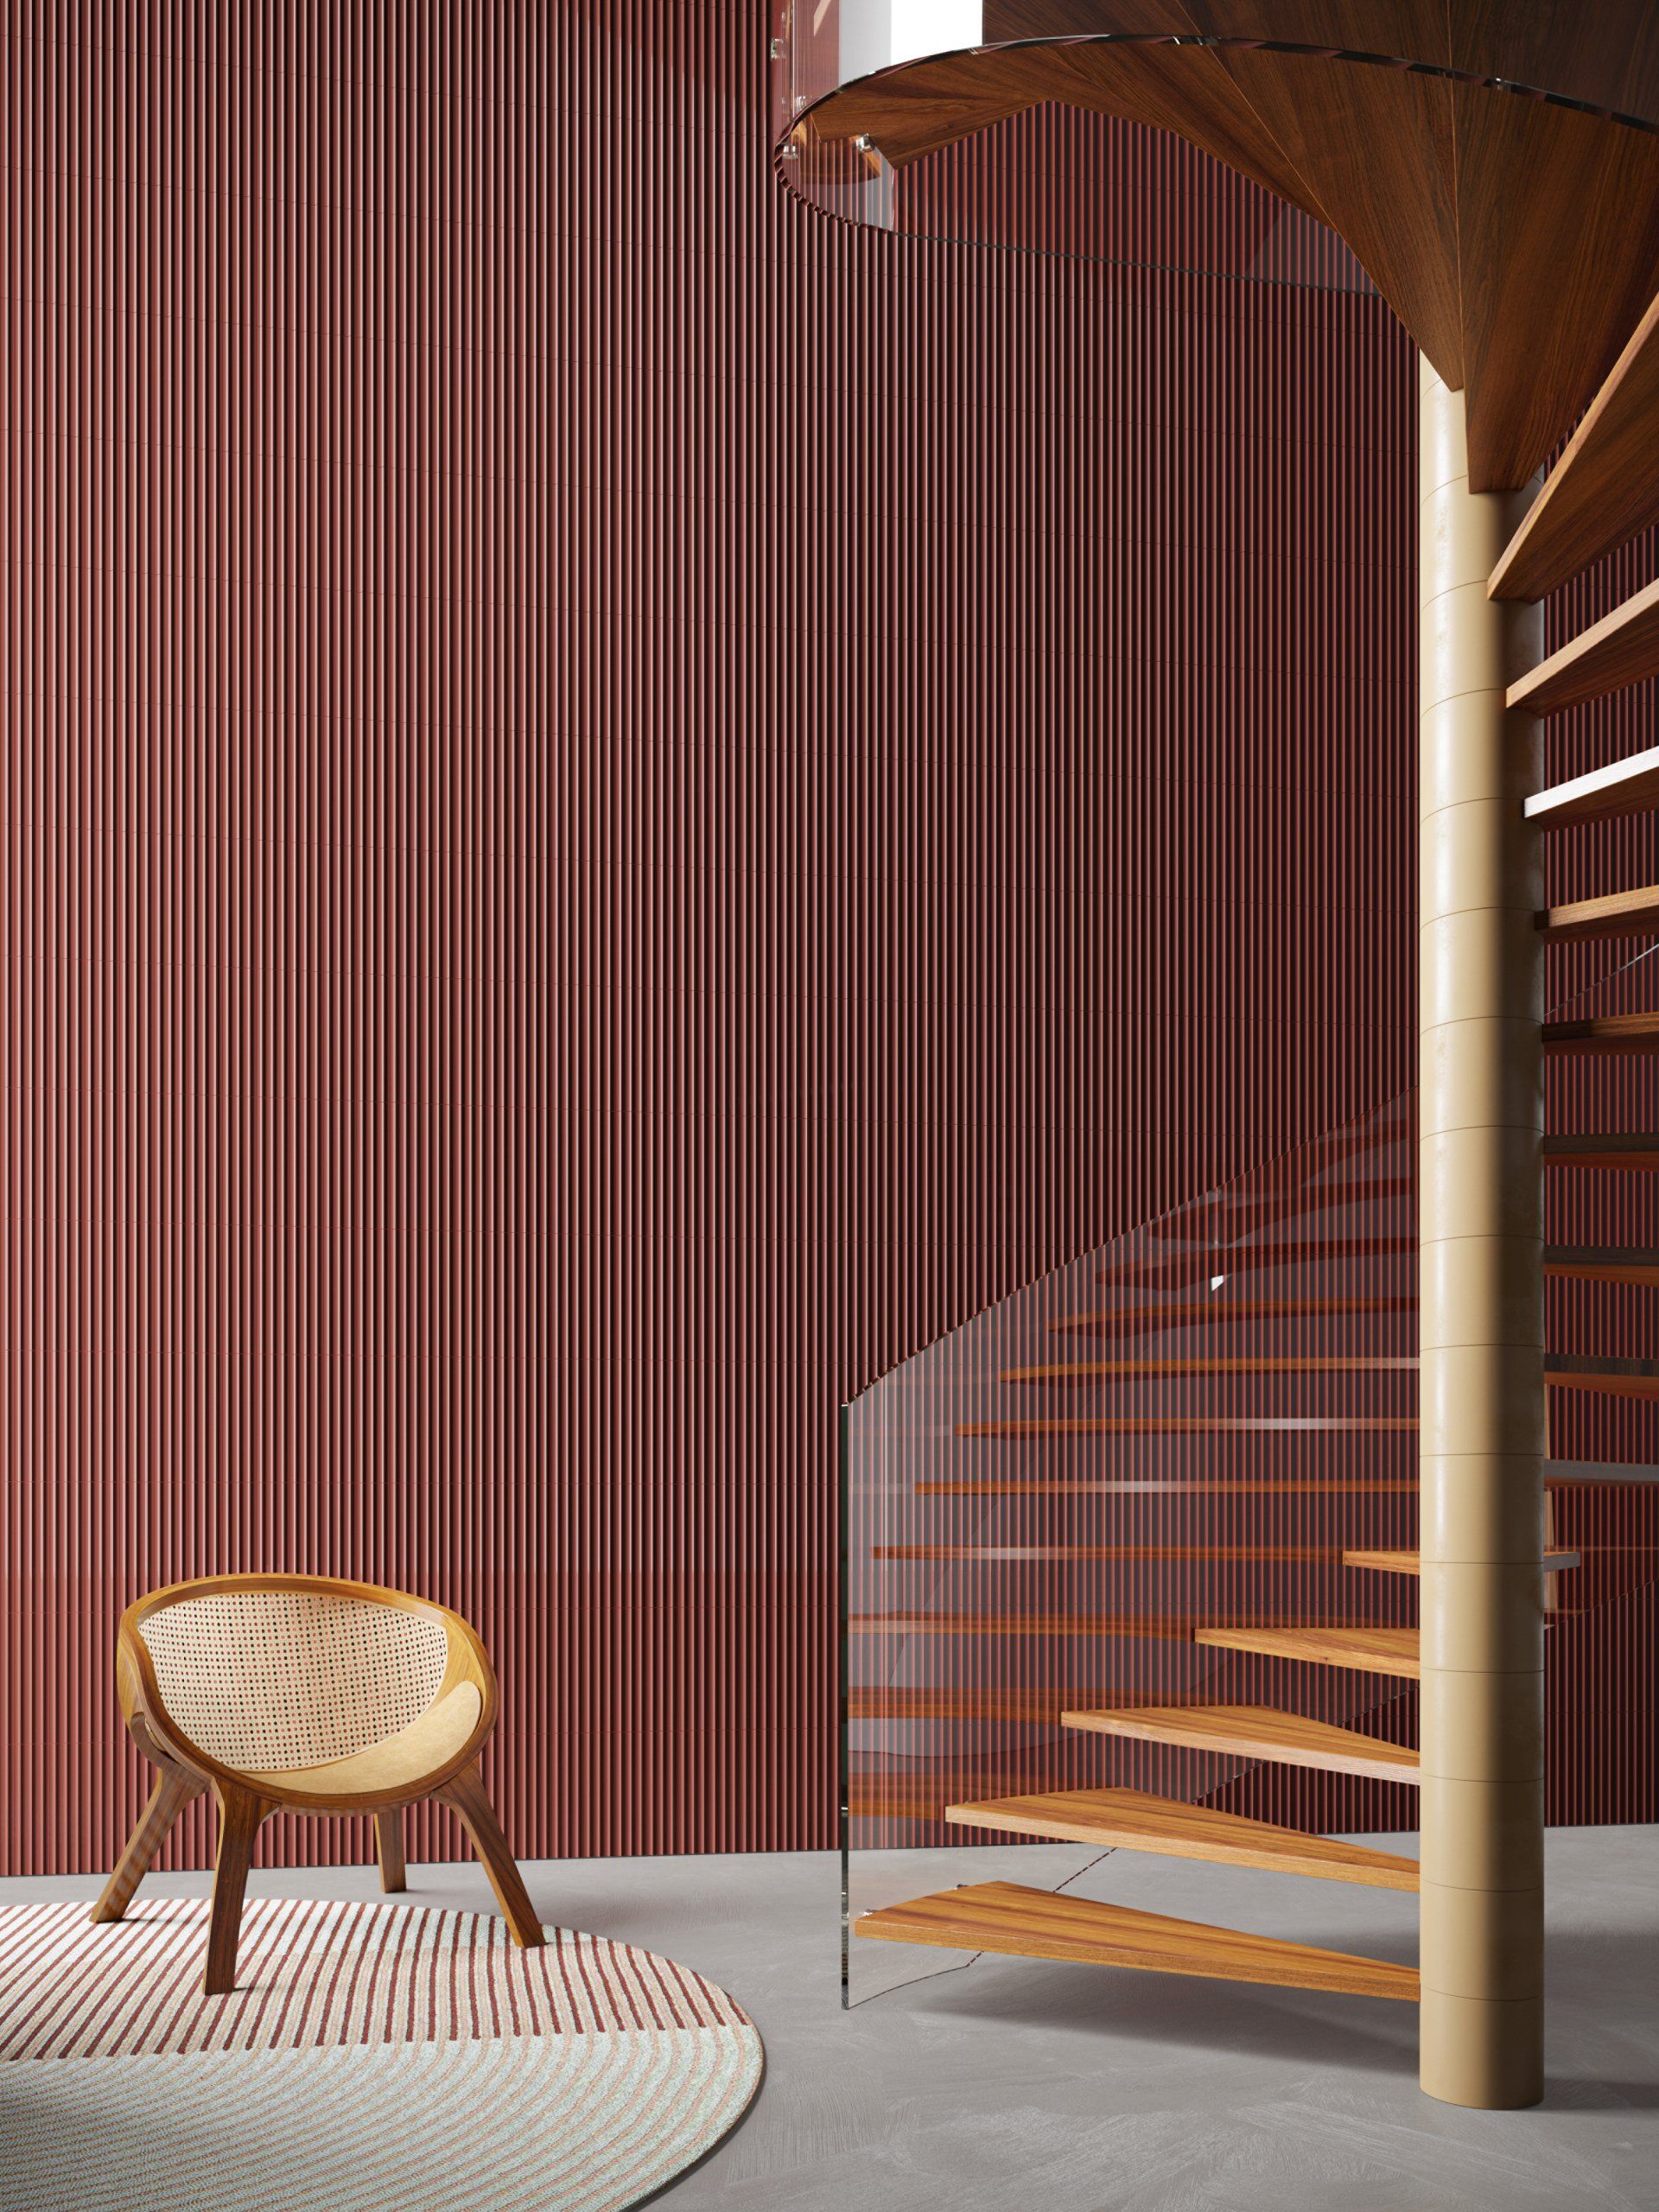 a fluted red wall feature with a spiral staircase with wooden effect steps and a wooden seat.